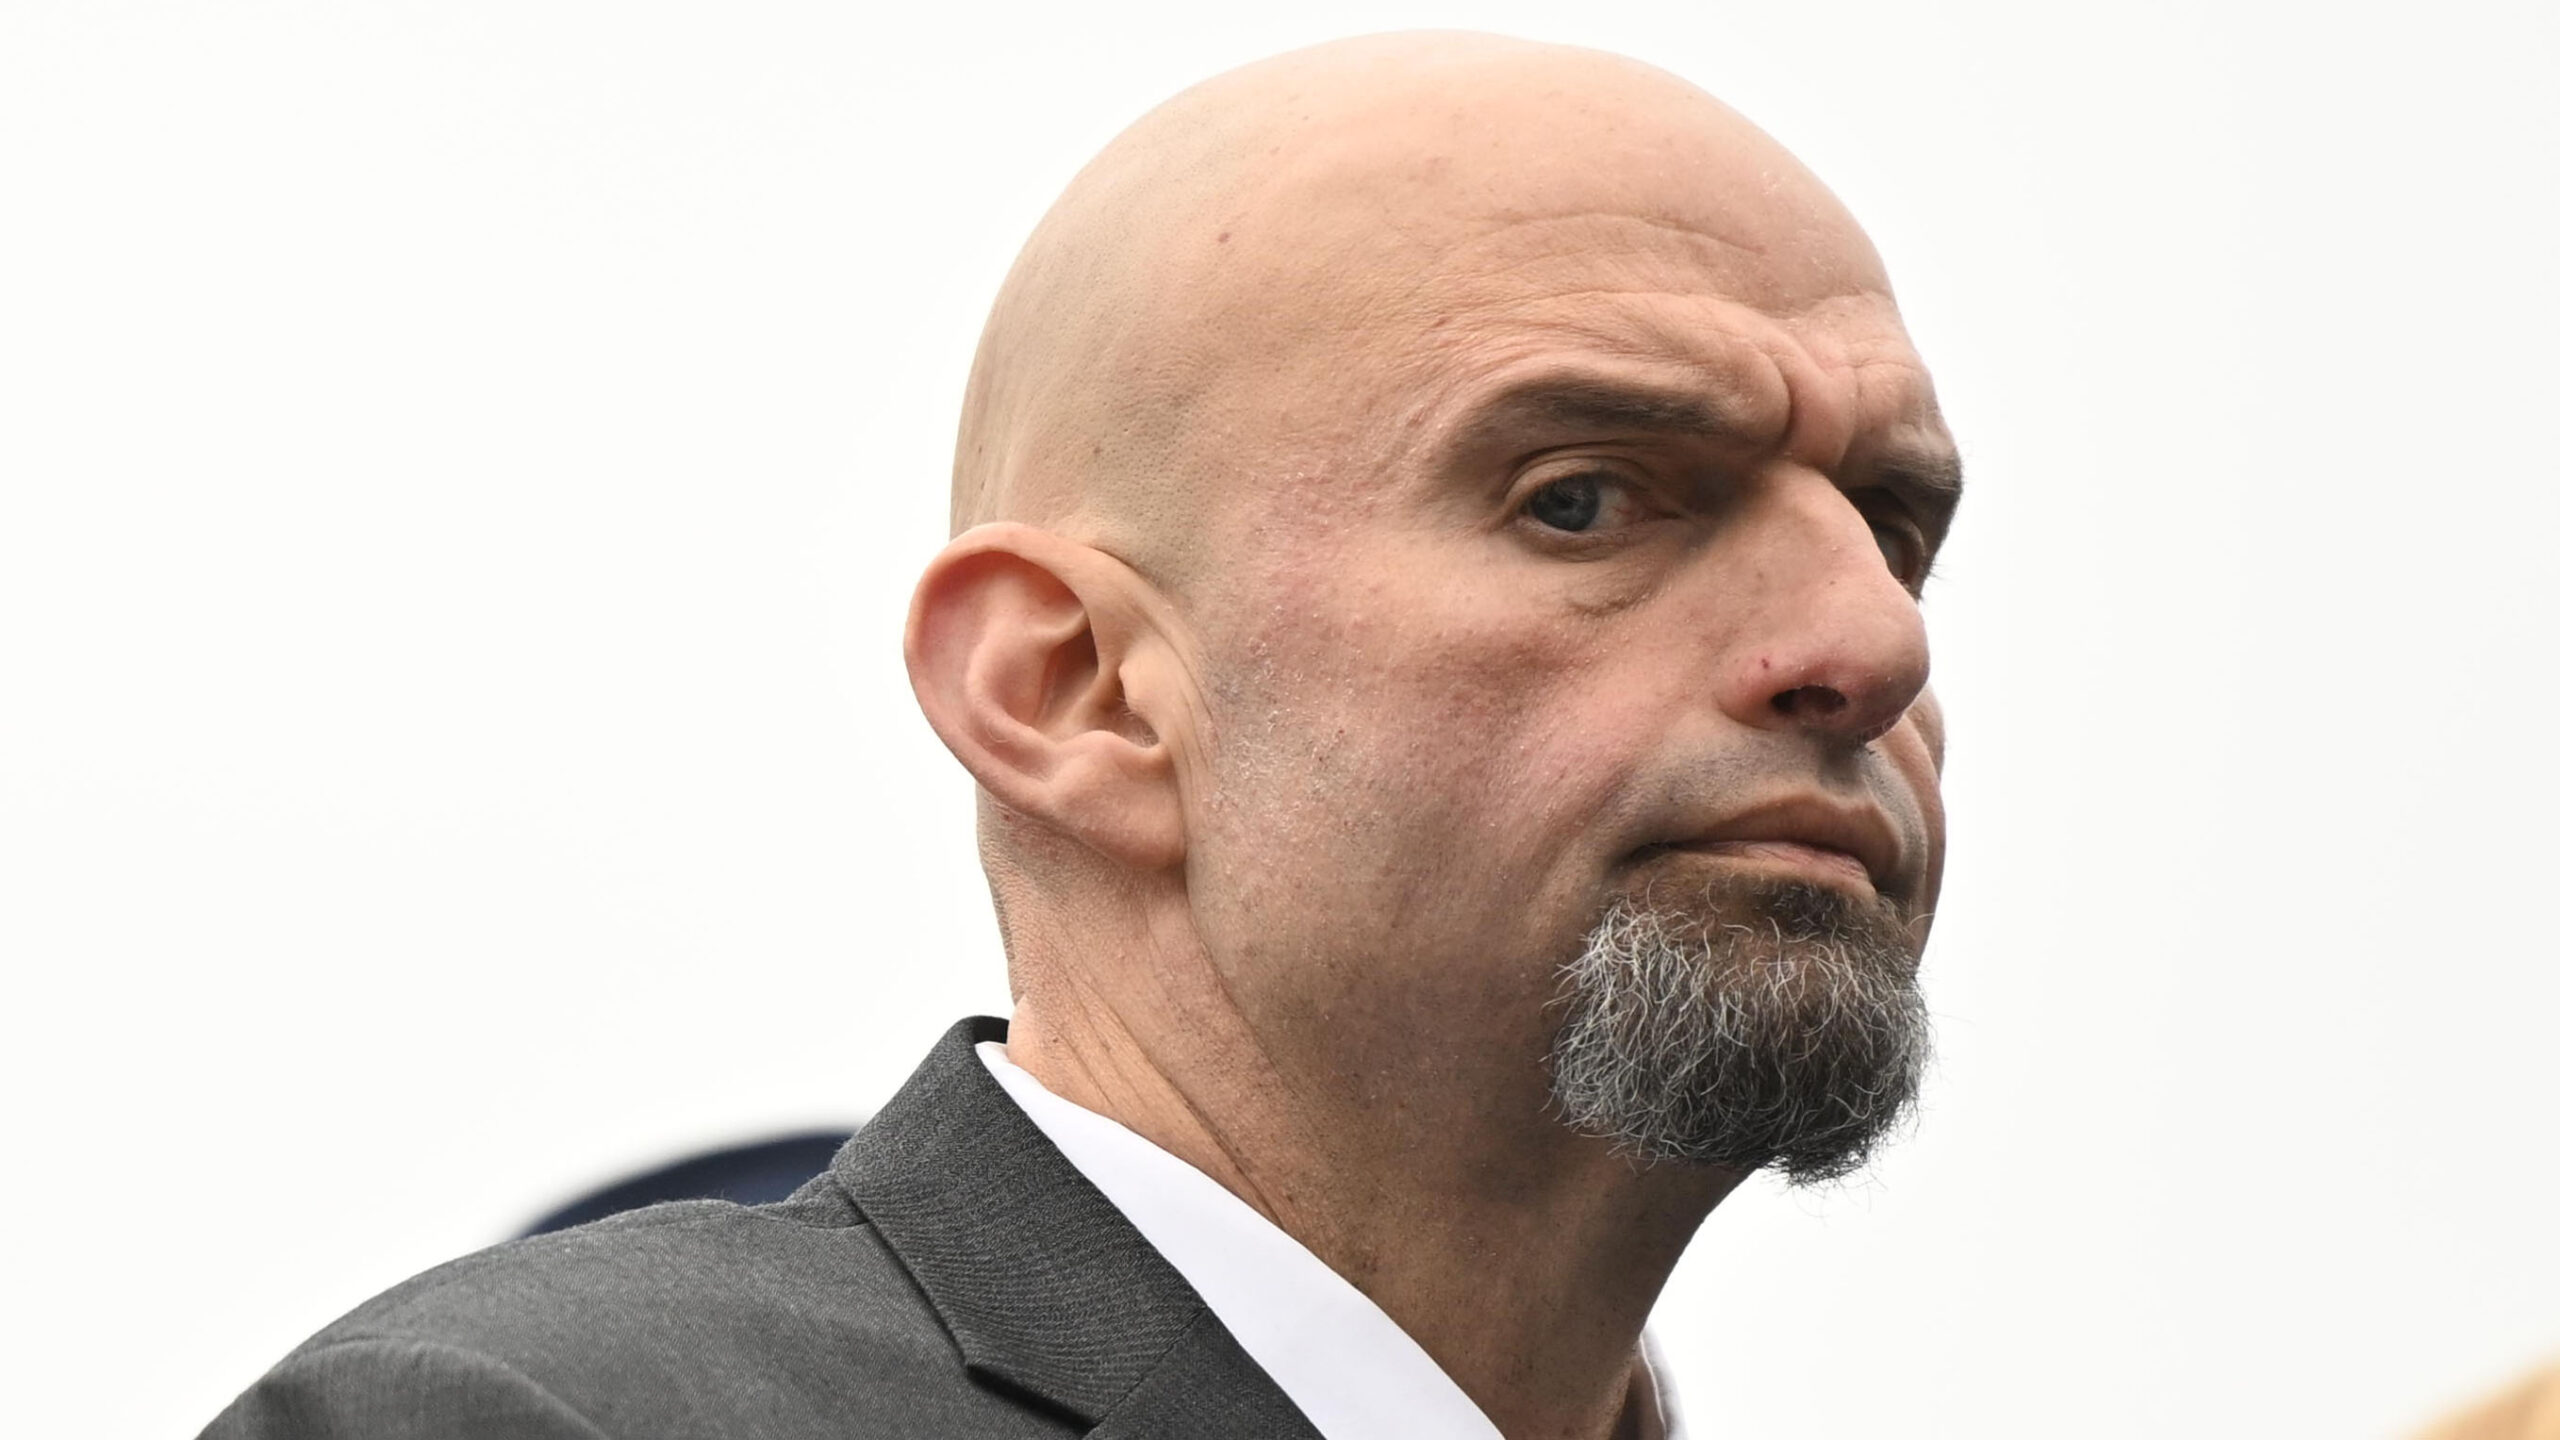 Fetterman blames campaign and opposition for his depression.